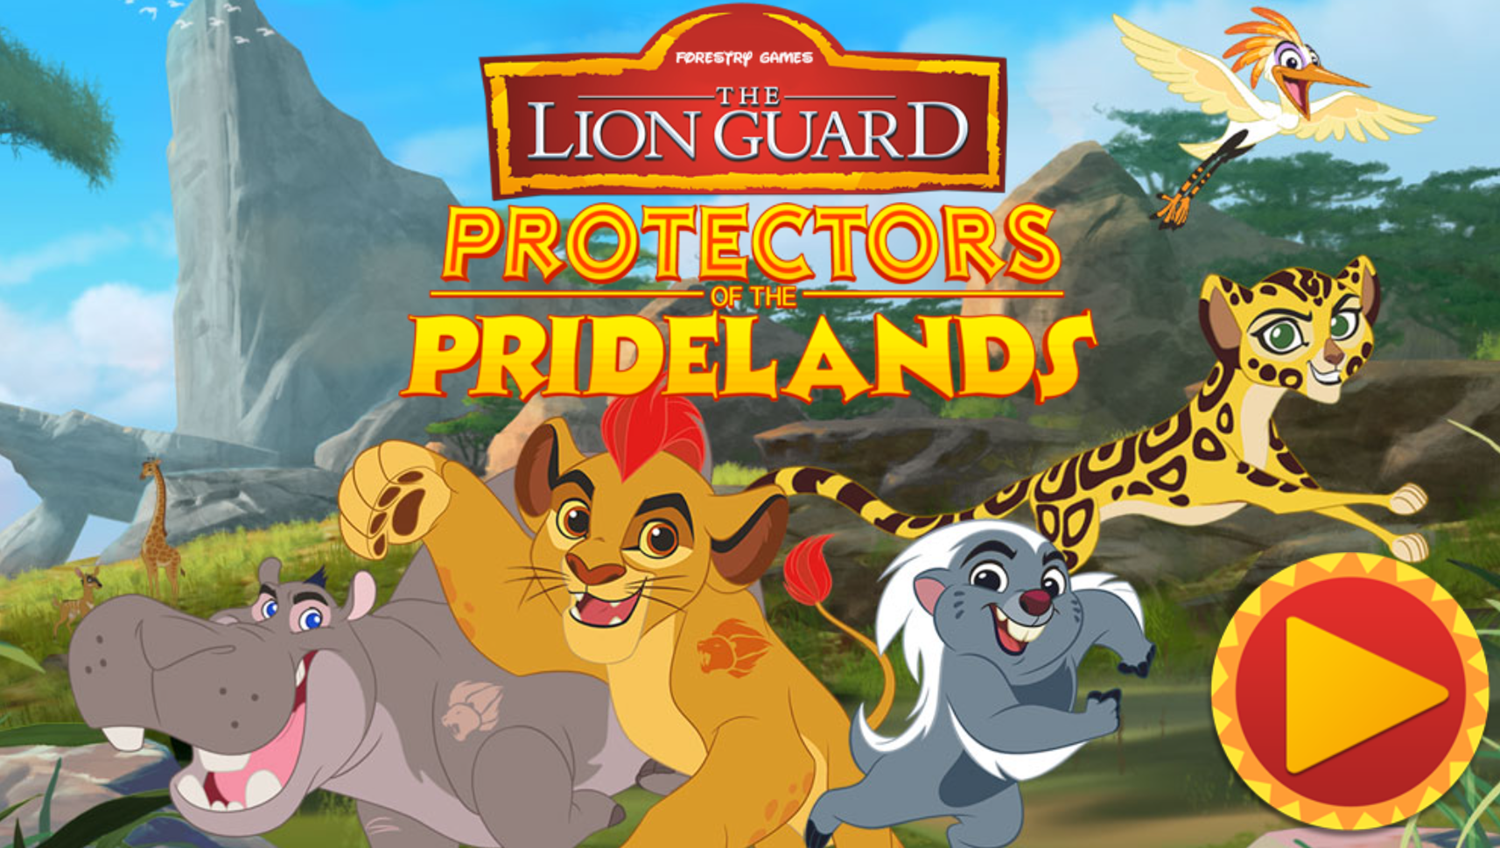 Lion Guard Protectors of the Pridelands Game Welcome Screen Screenshot.